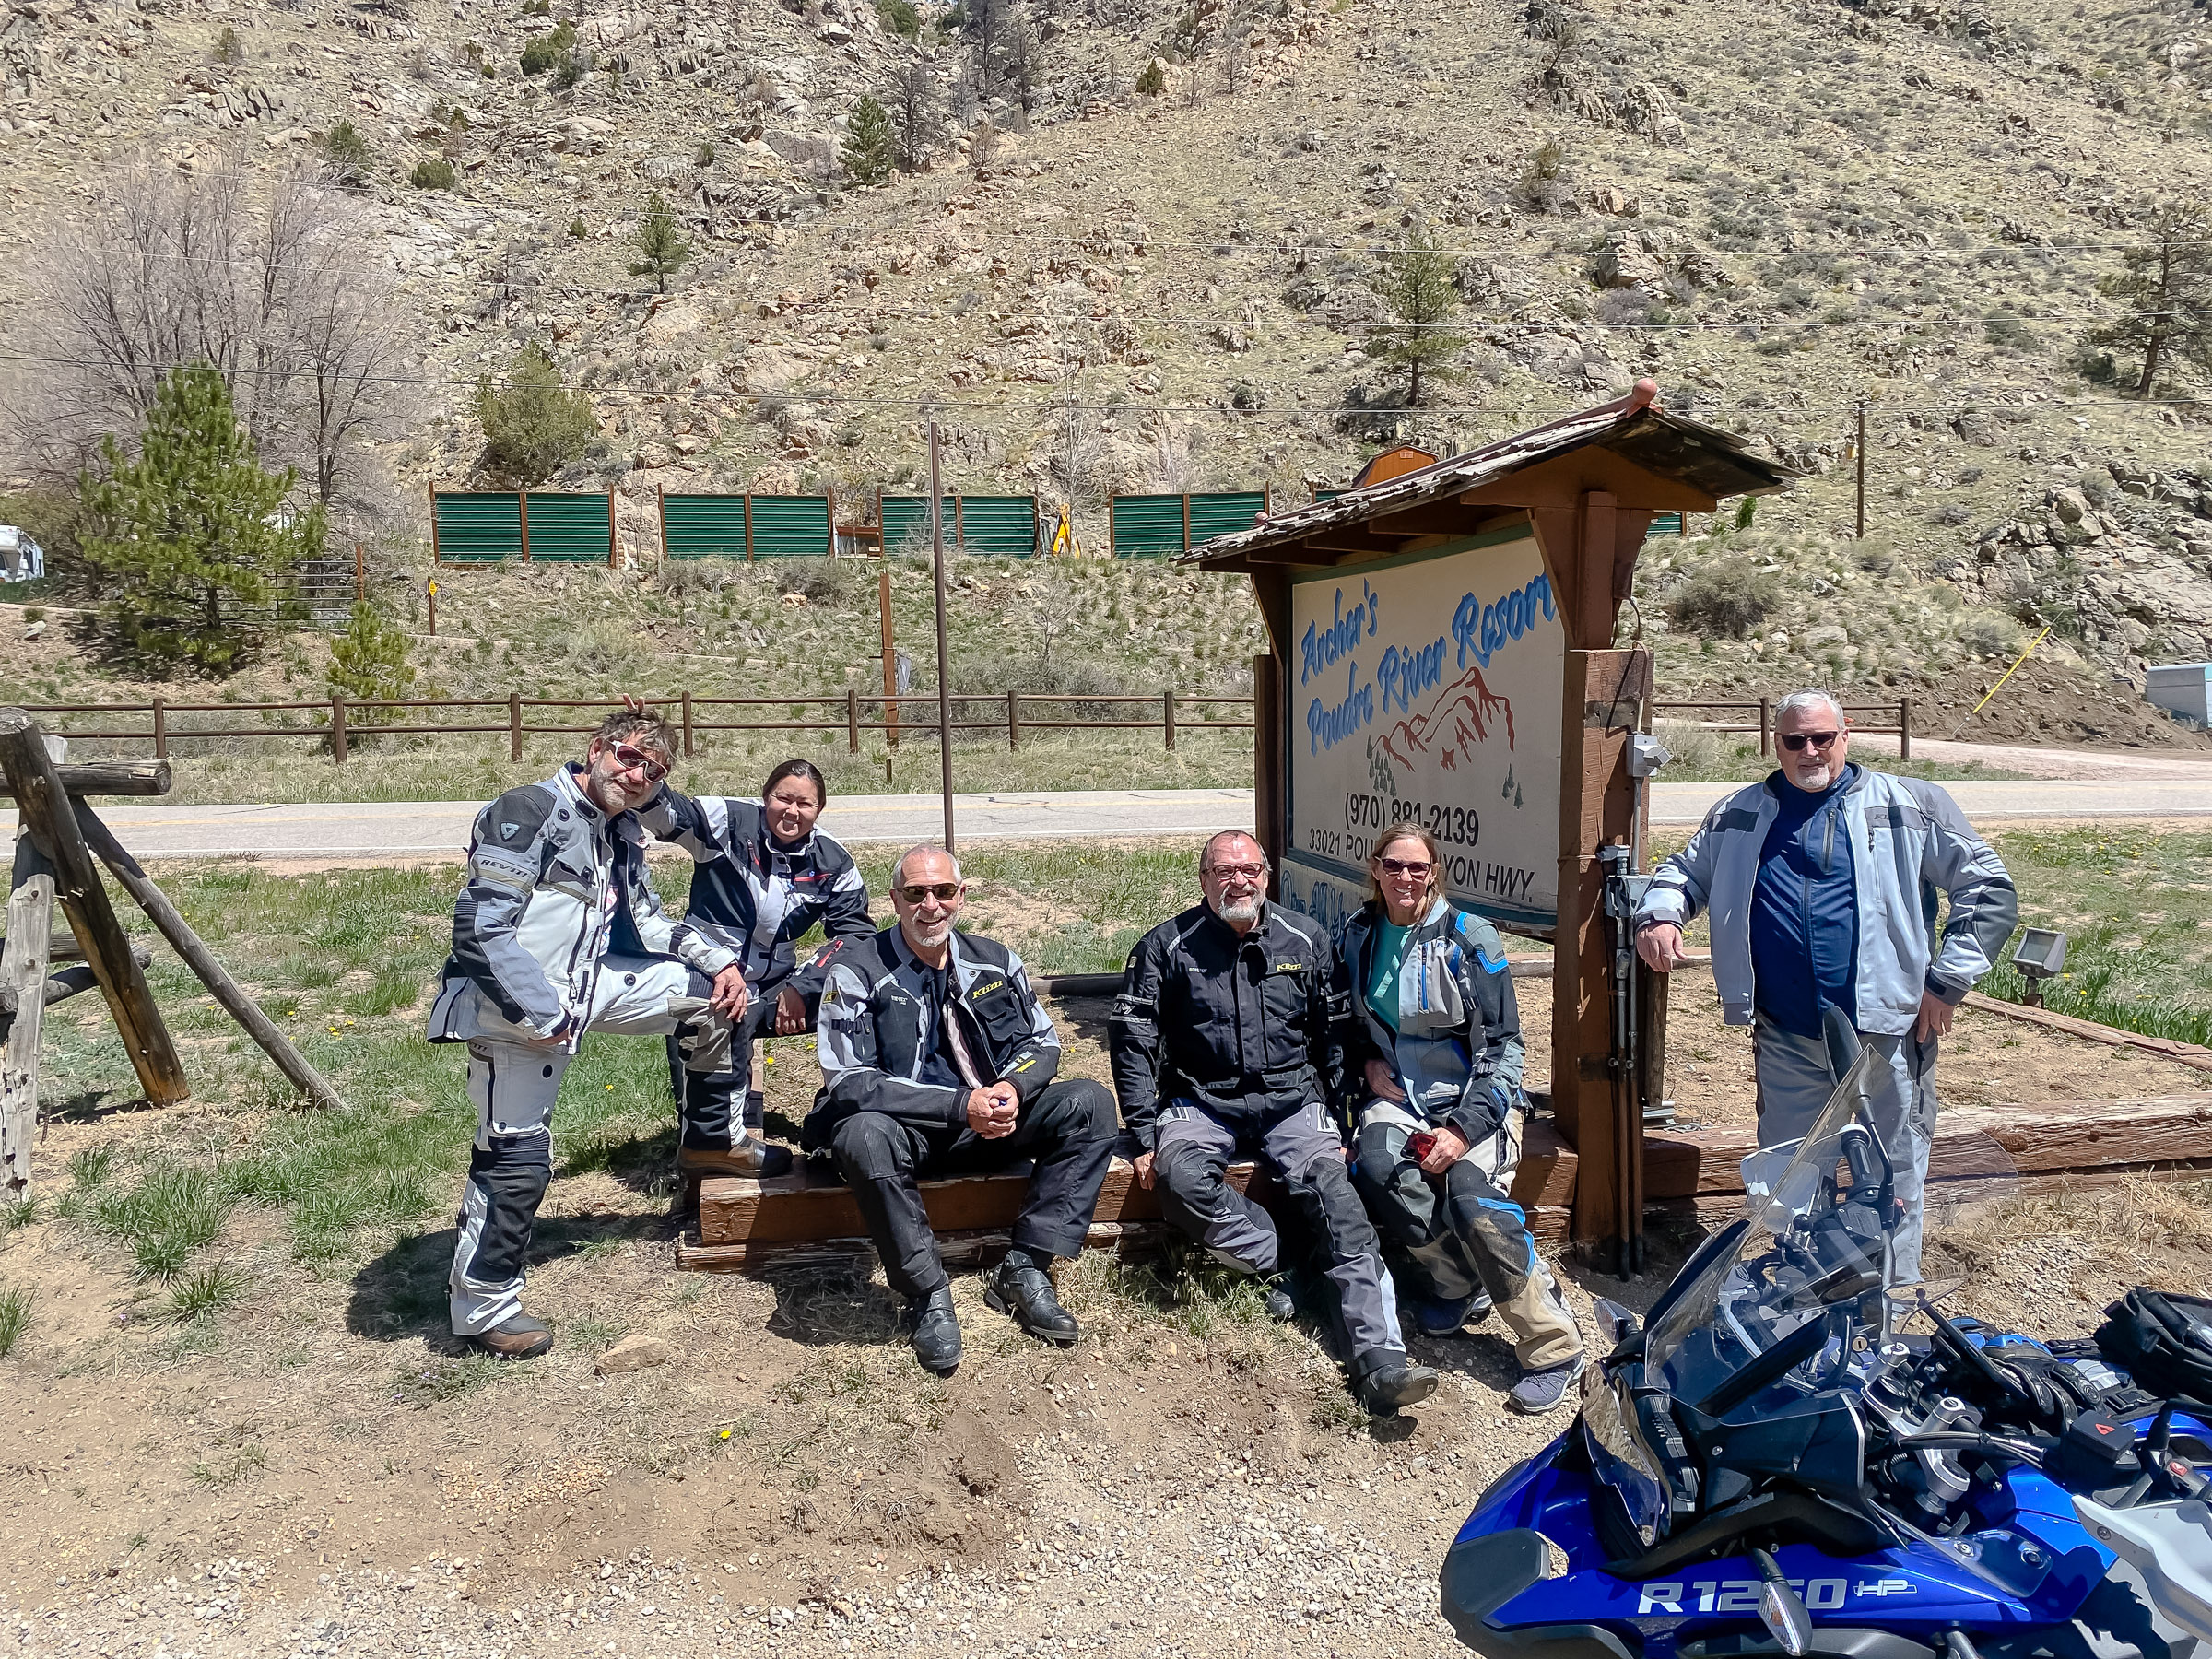 We had a great day of riding around Horse Tooth Reservoir, through Masonville, up Buckhorn road over Rist Canyon and along 14 / Poudre Canyon for a total of 77 miles.